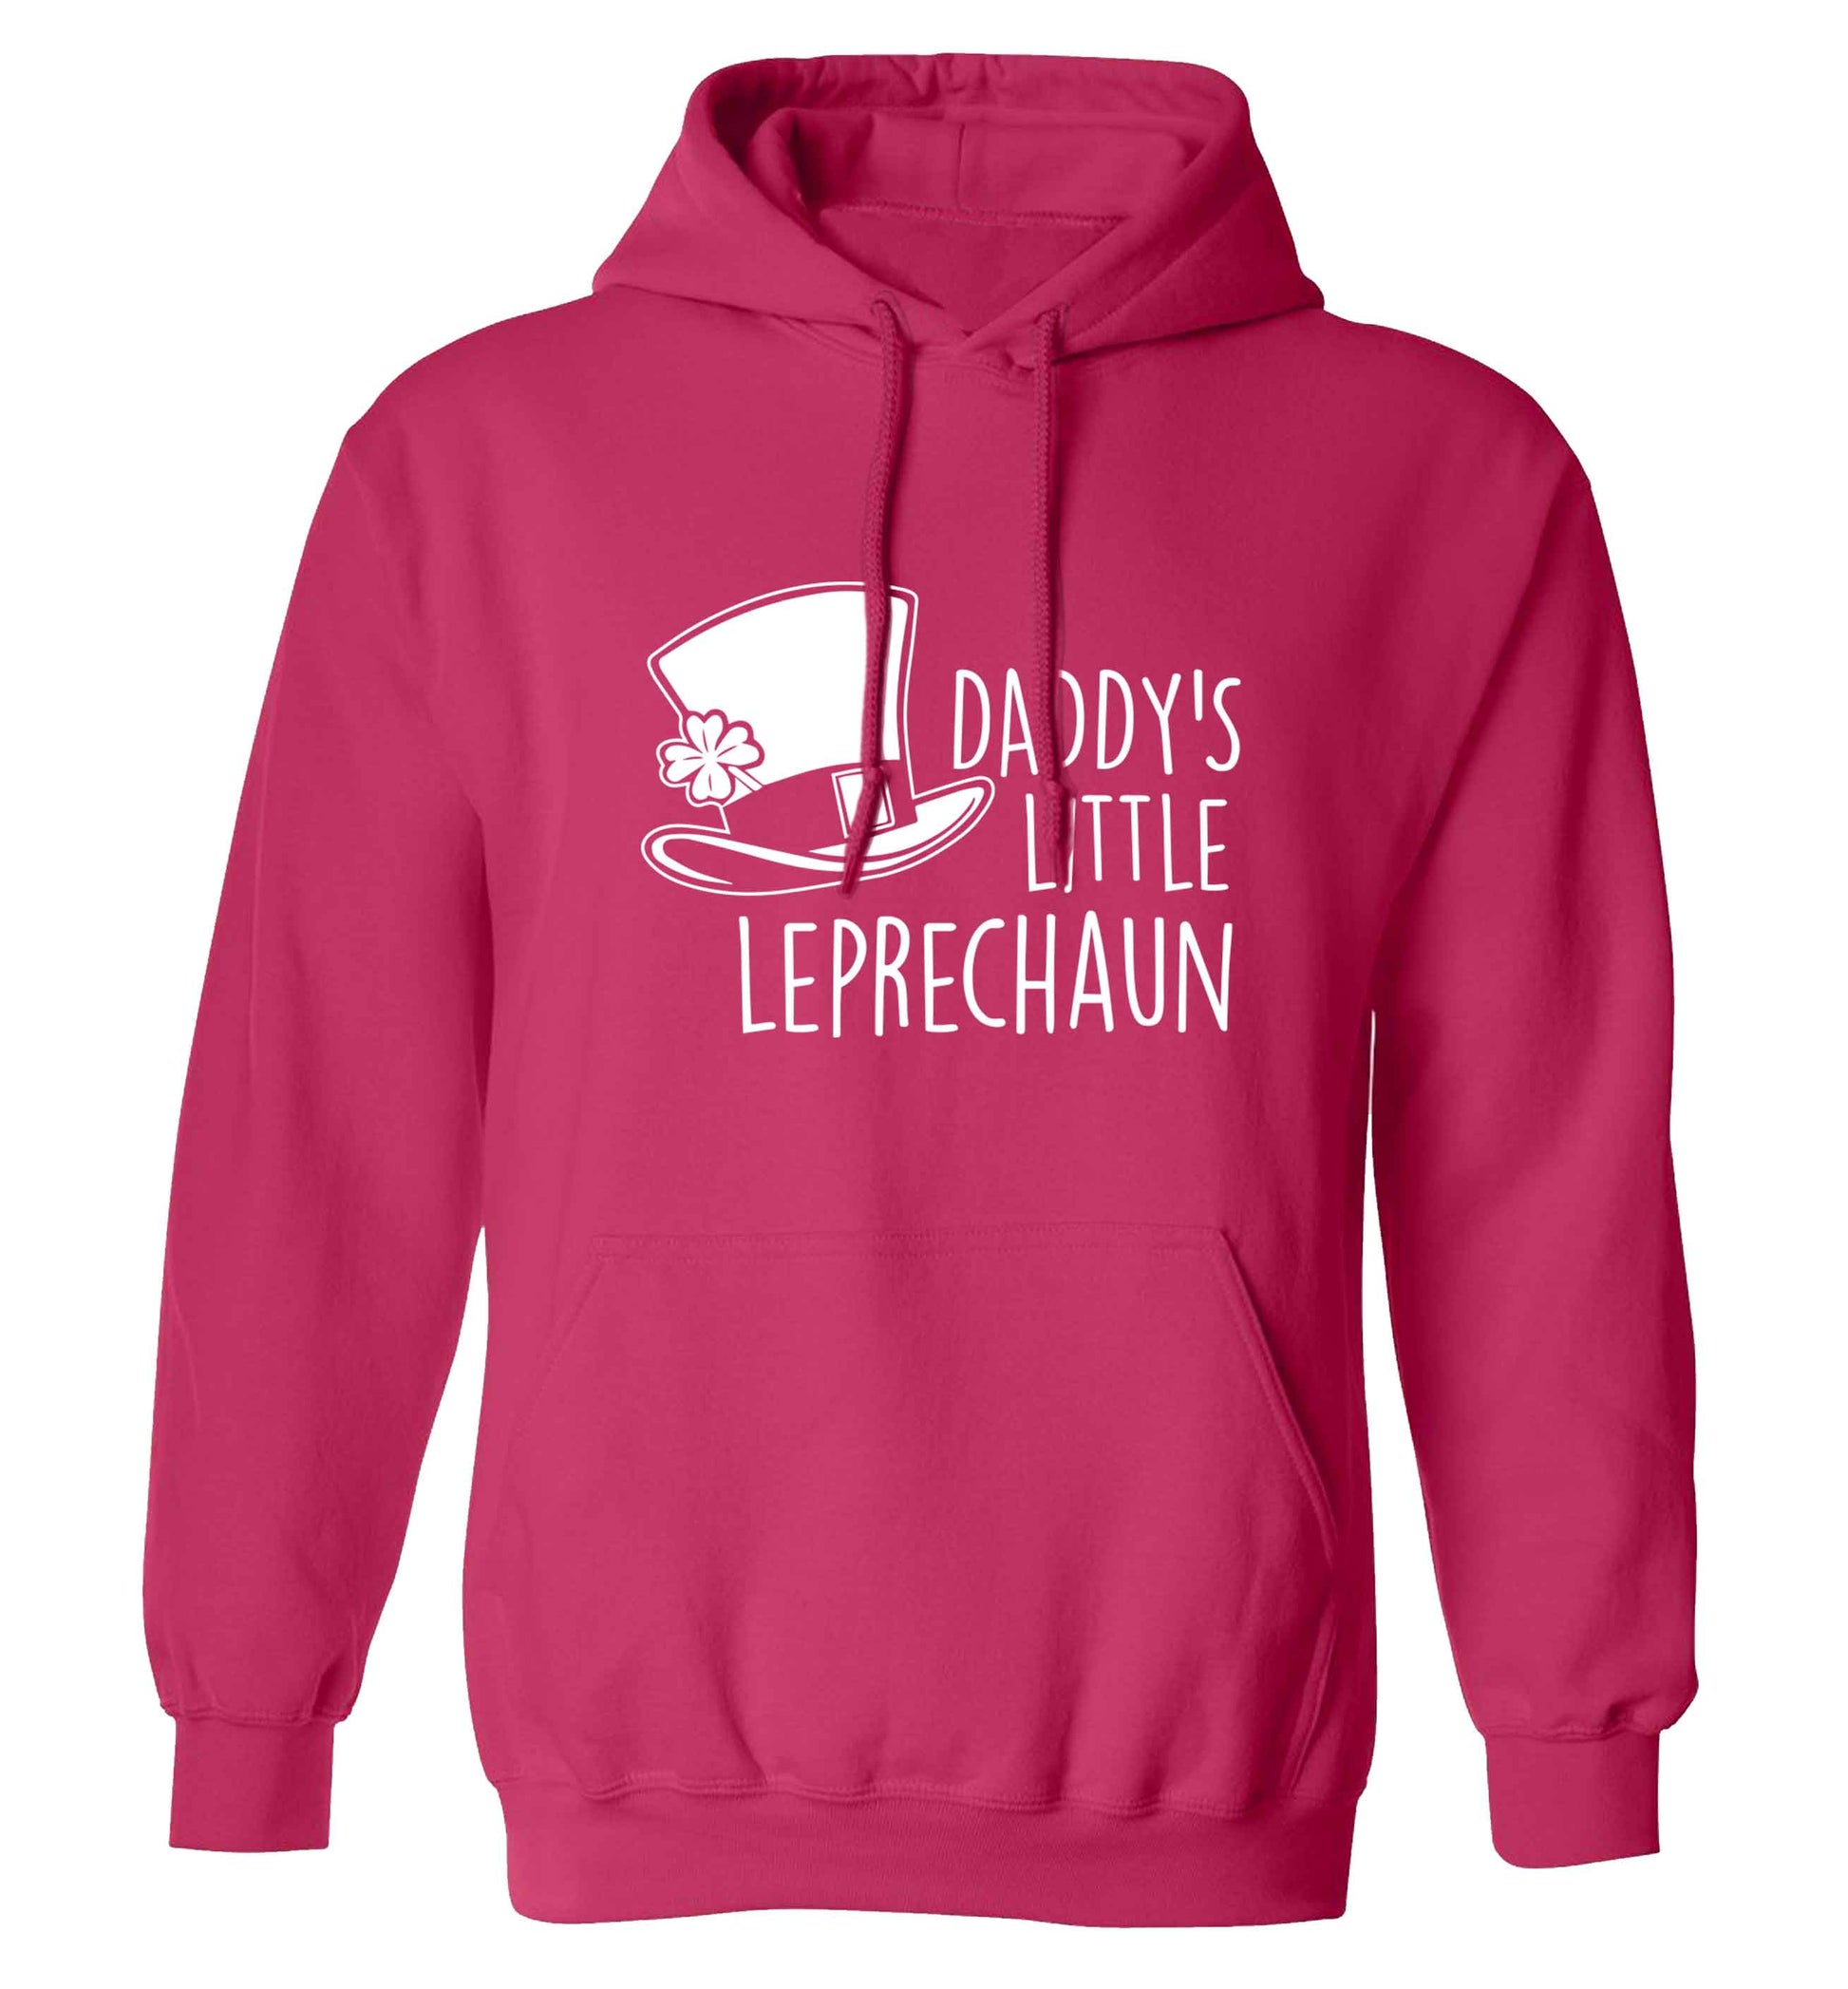 Daddy's lucky charm adults unisex pink hoodie 2XL